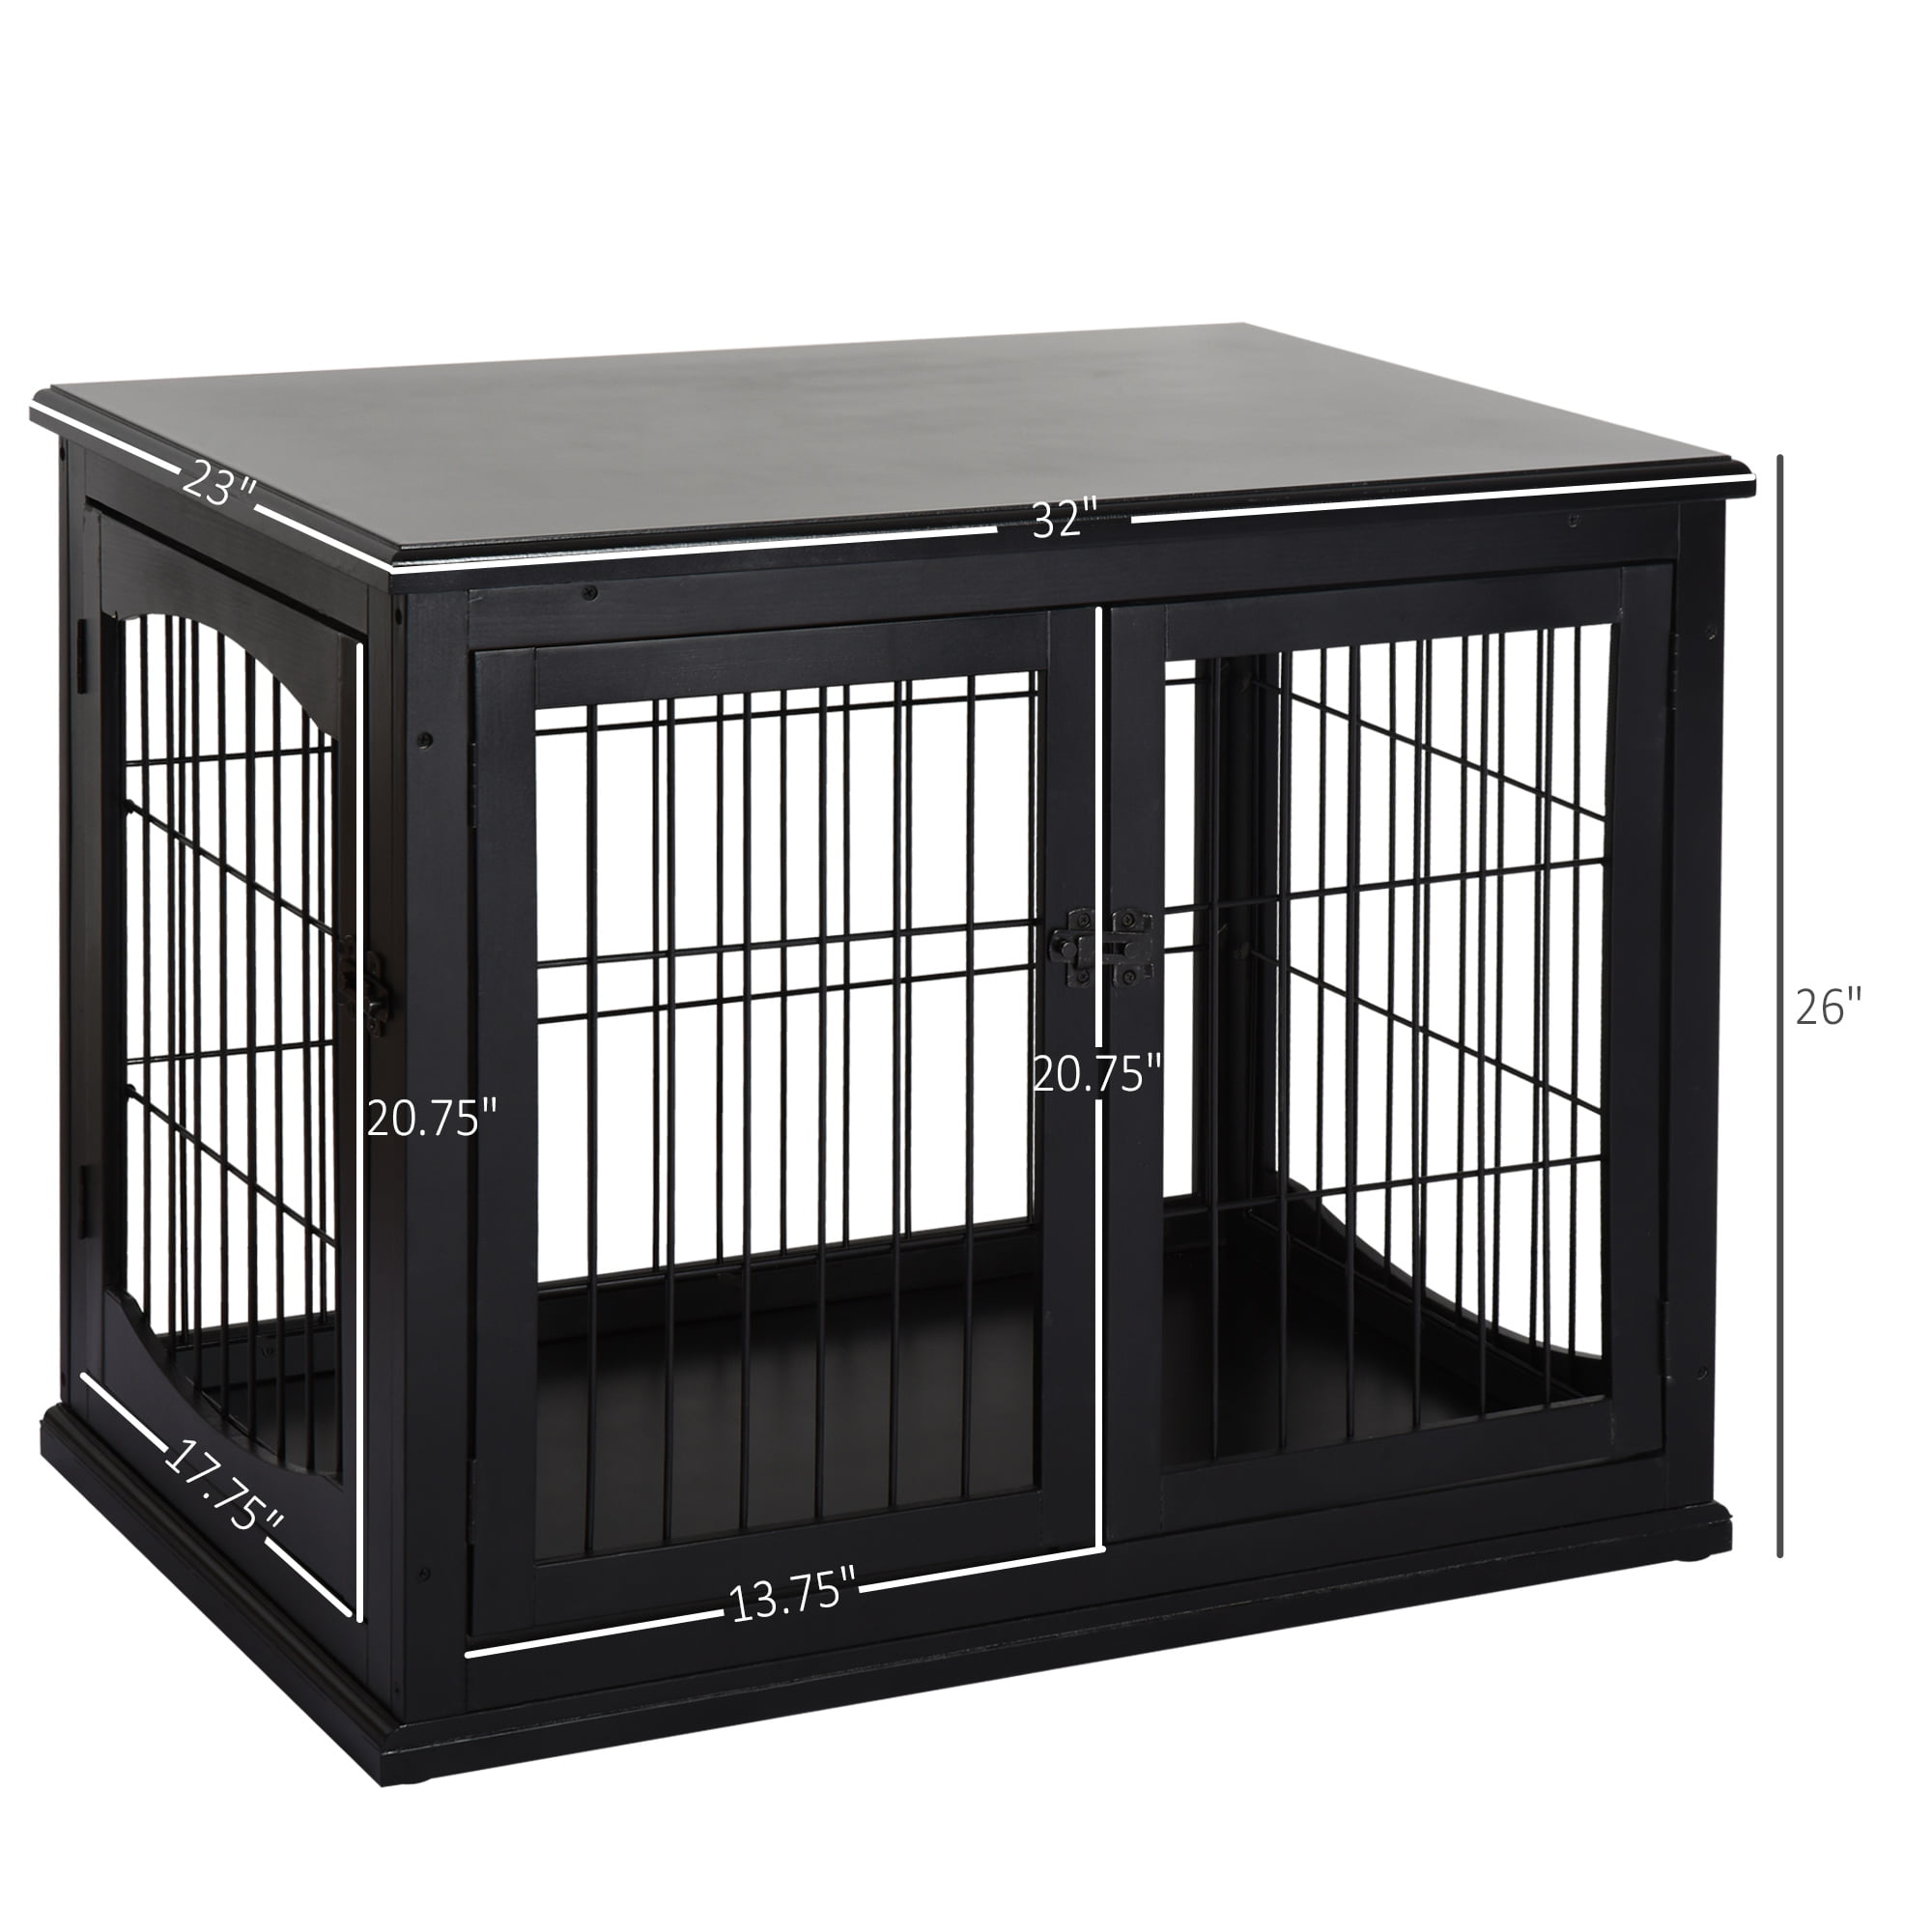 Dog Kennel Indoor Wooden Crates Wood & Wire Dog Crate,Pet Crate with Cloth Cover,Wooden Dog Cage House SIMPLY 